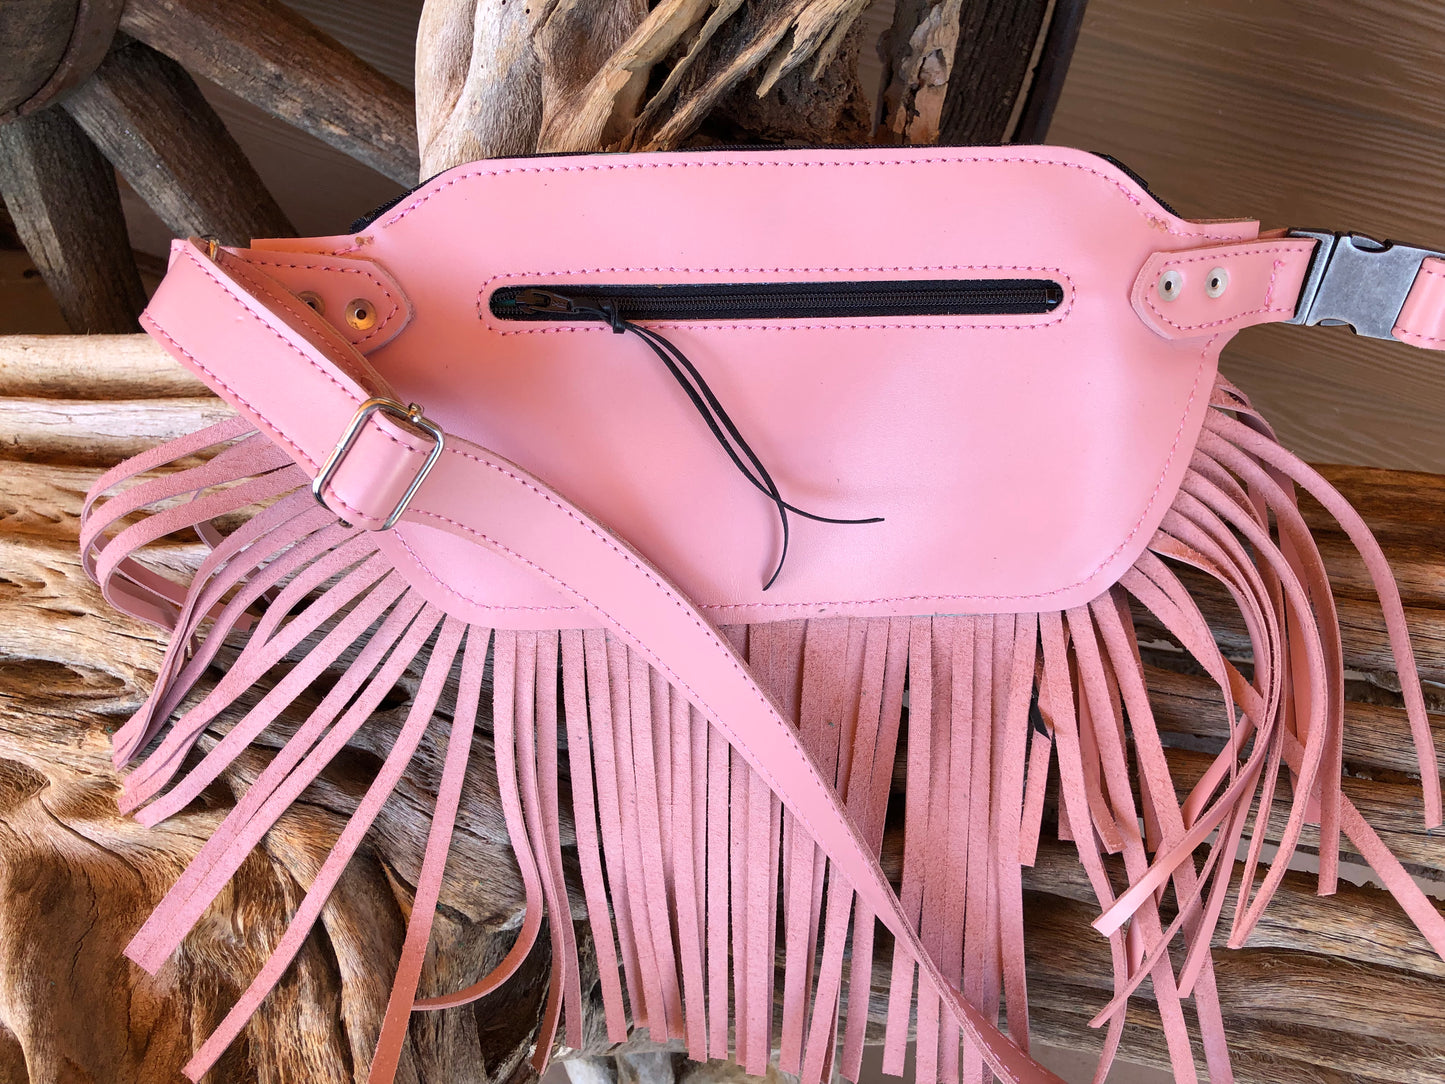 Southwestern tooled leather floral arrow and faux beadwork pink fringe Fanny pack